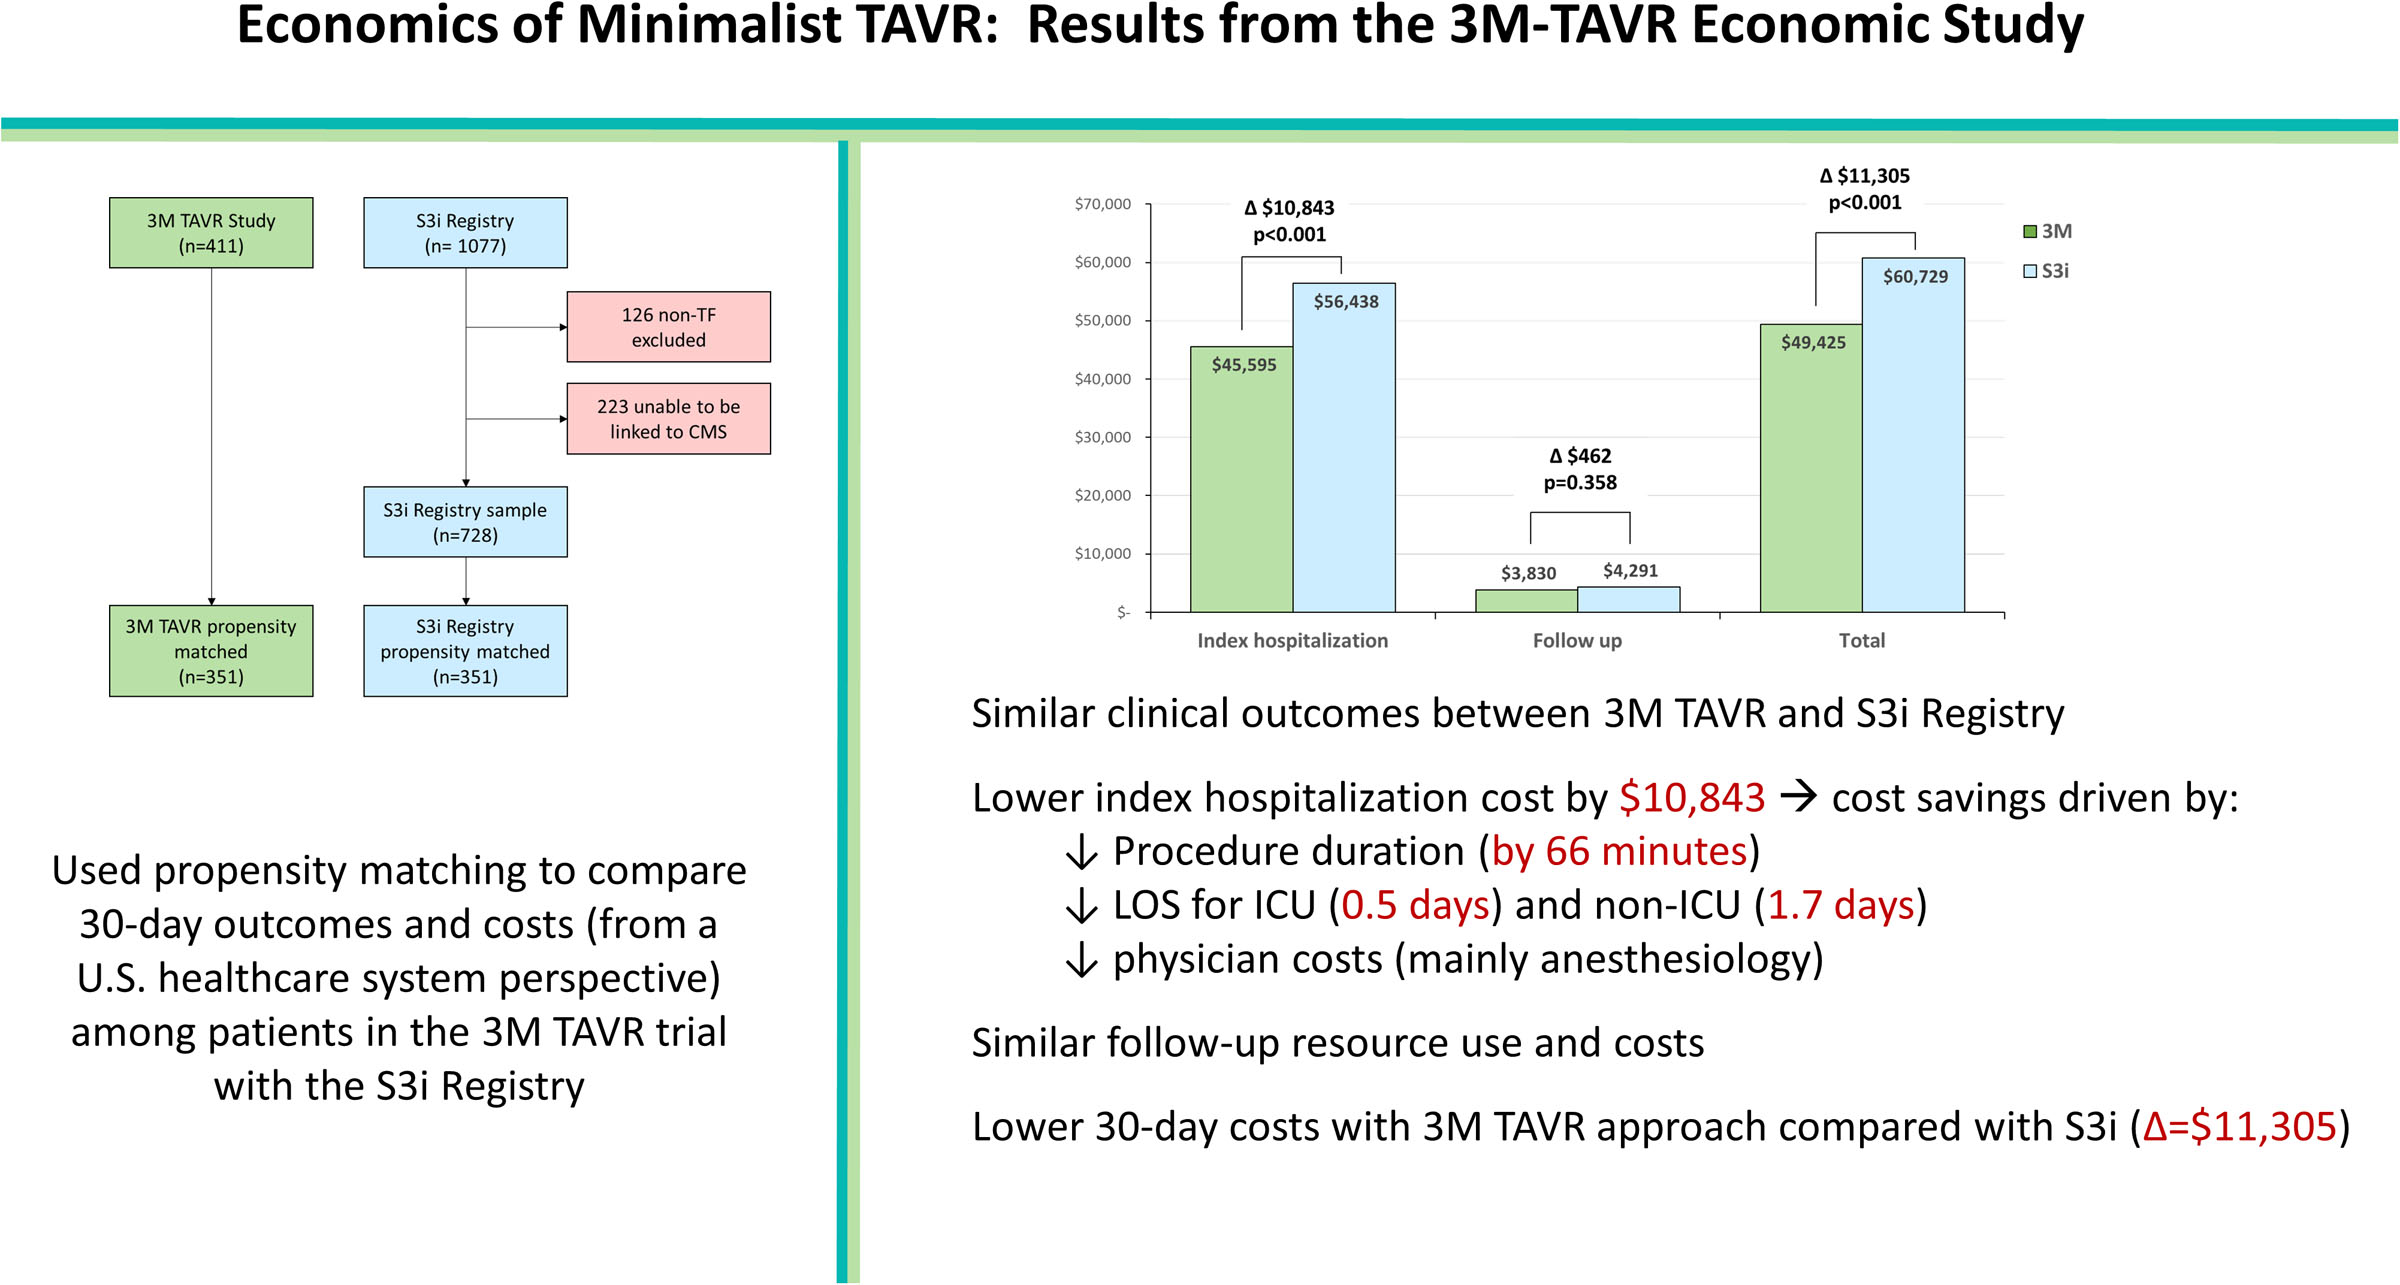 Economics of Minimalist Transcatheter Aortic Valve Replacement: Results From the 3M-TAVR Economic Study